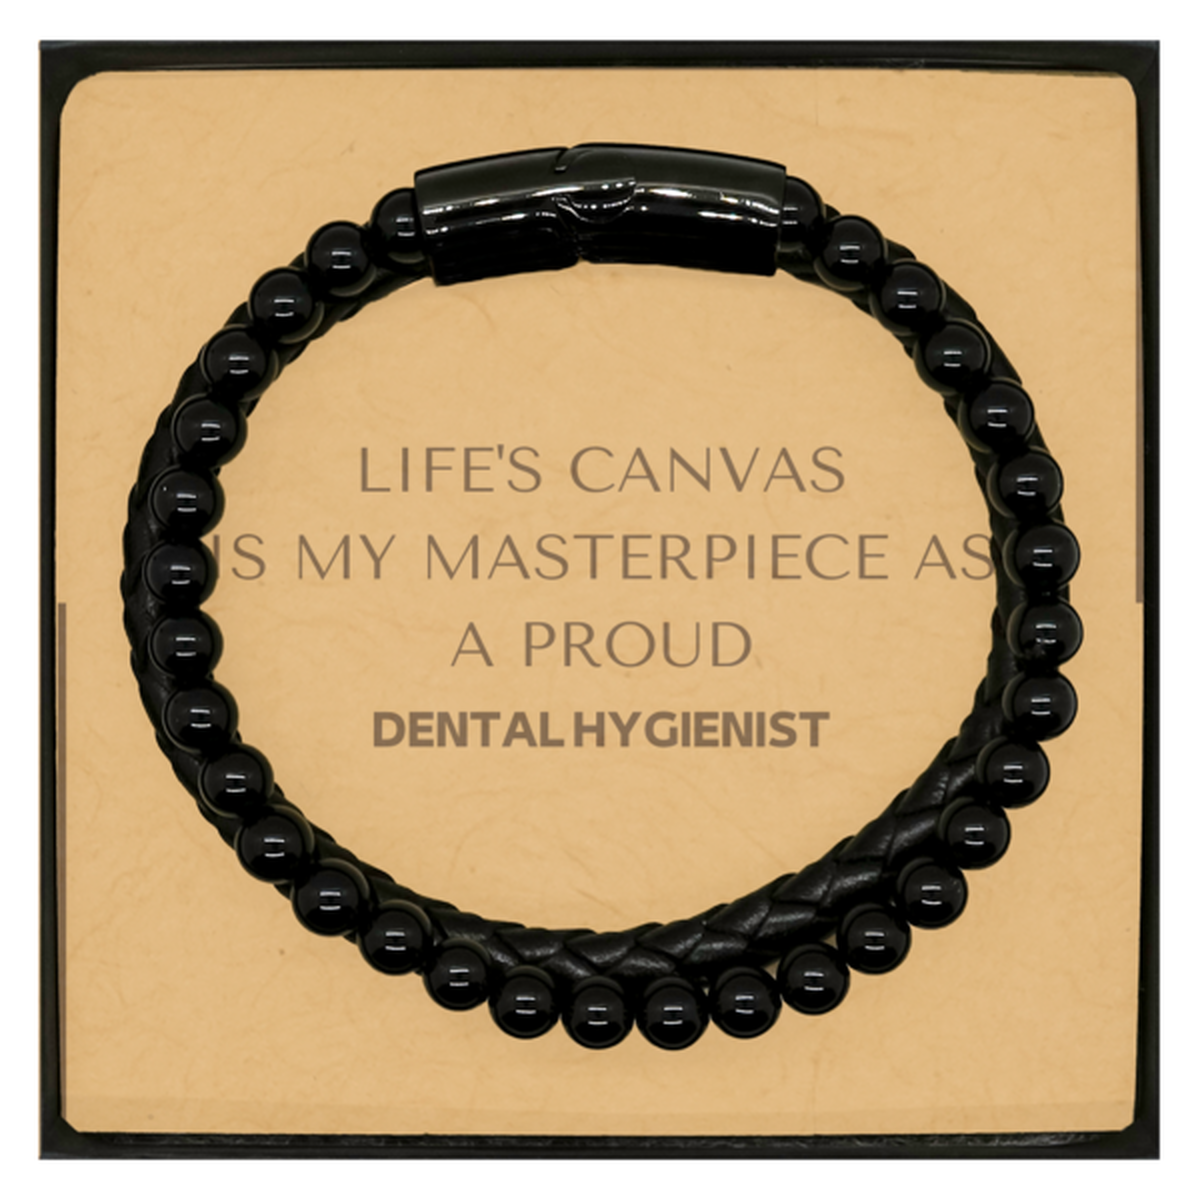 Proud Dental Hygienist Gifts, Life's canvas is my masterpiece, Epic Birthday Christmas Unique Stone Leather Bracelets For Dental Hygienist, Coworkers, Men, Women, Friends